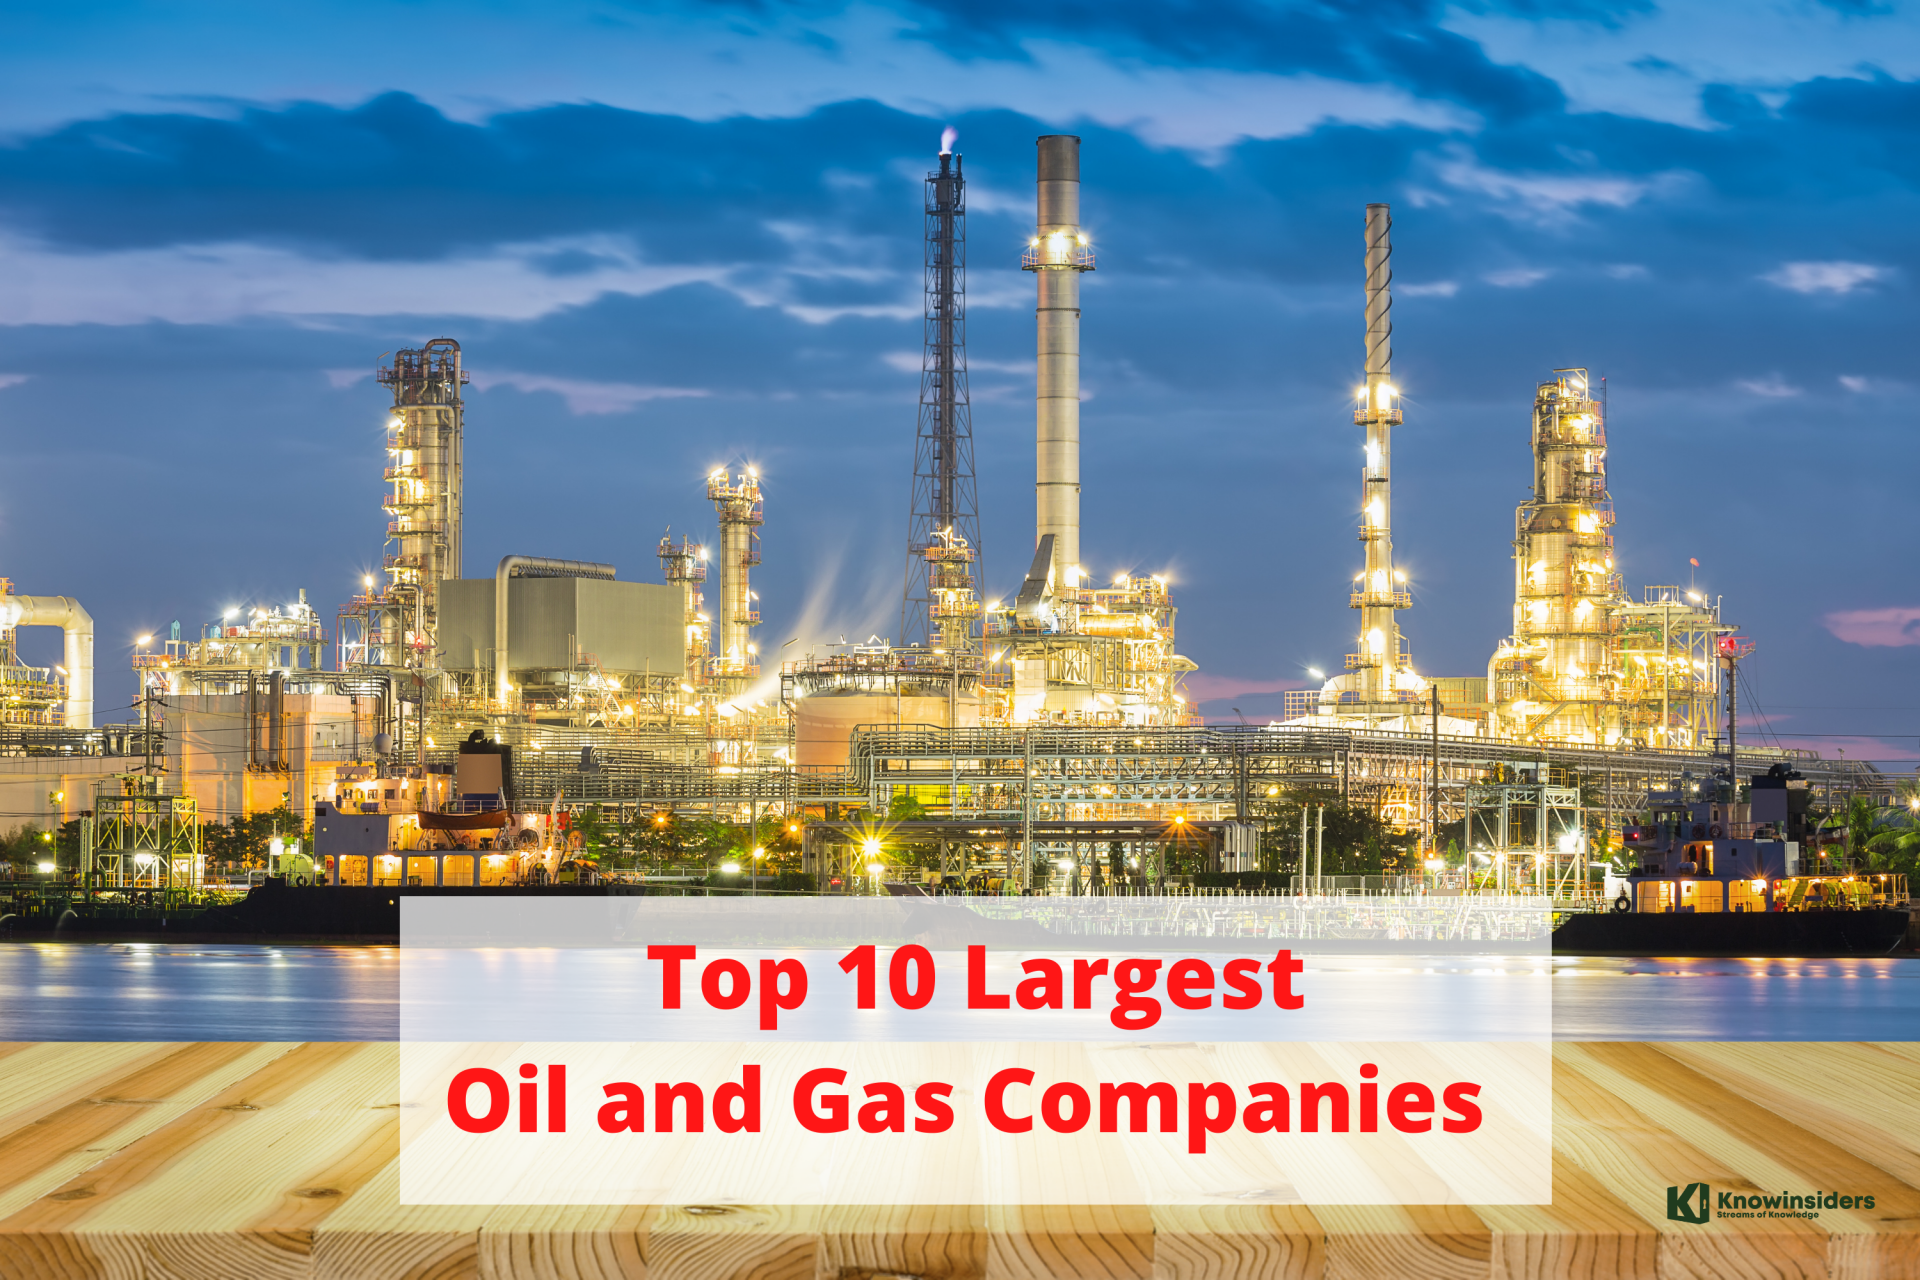 Top 10 Largest Oil and Gas Companies in the World